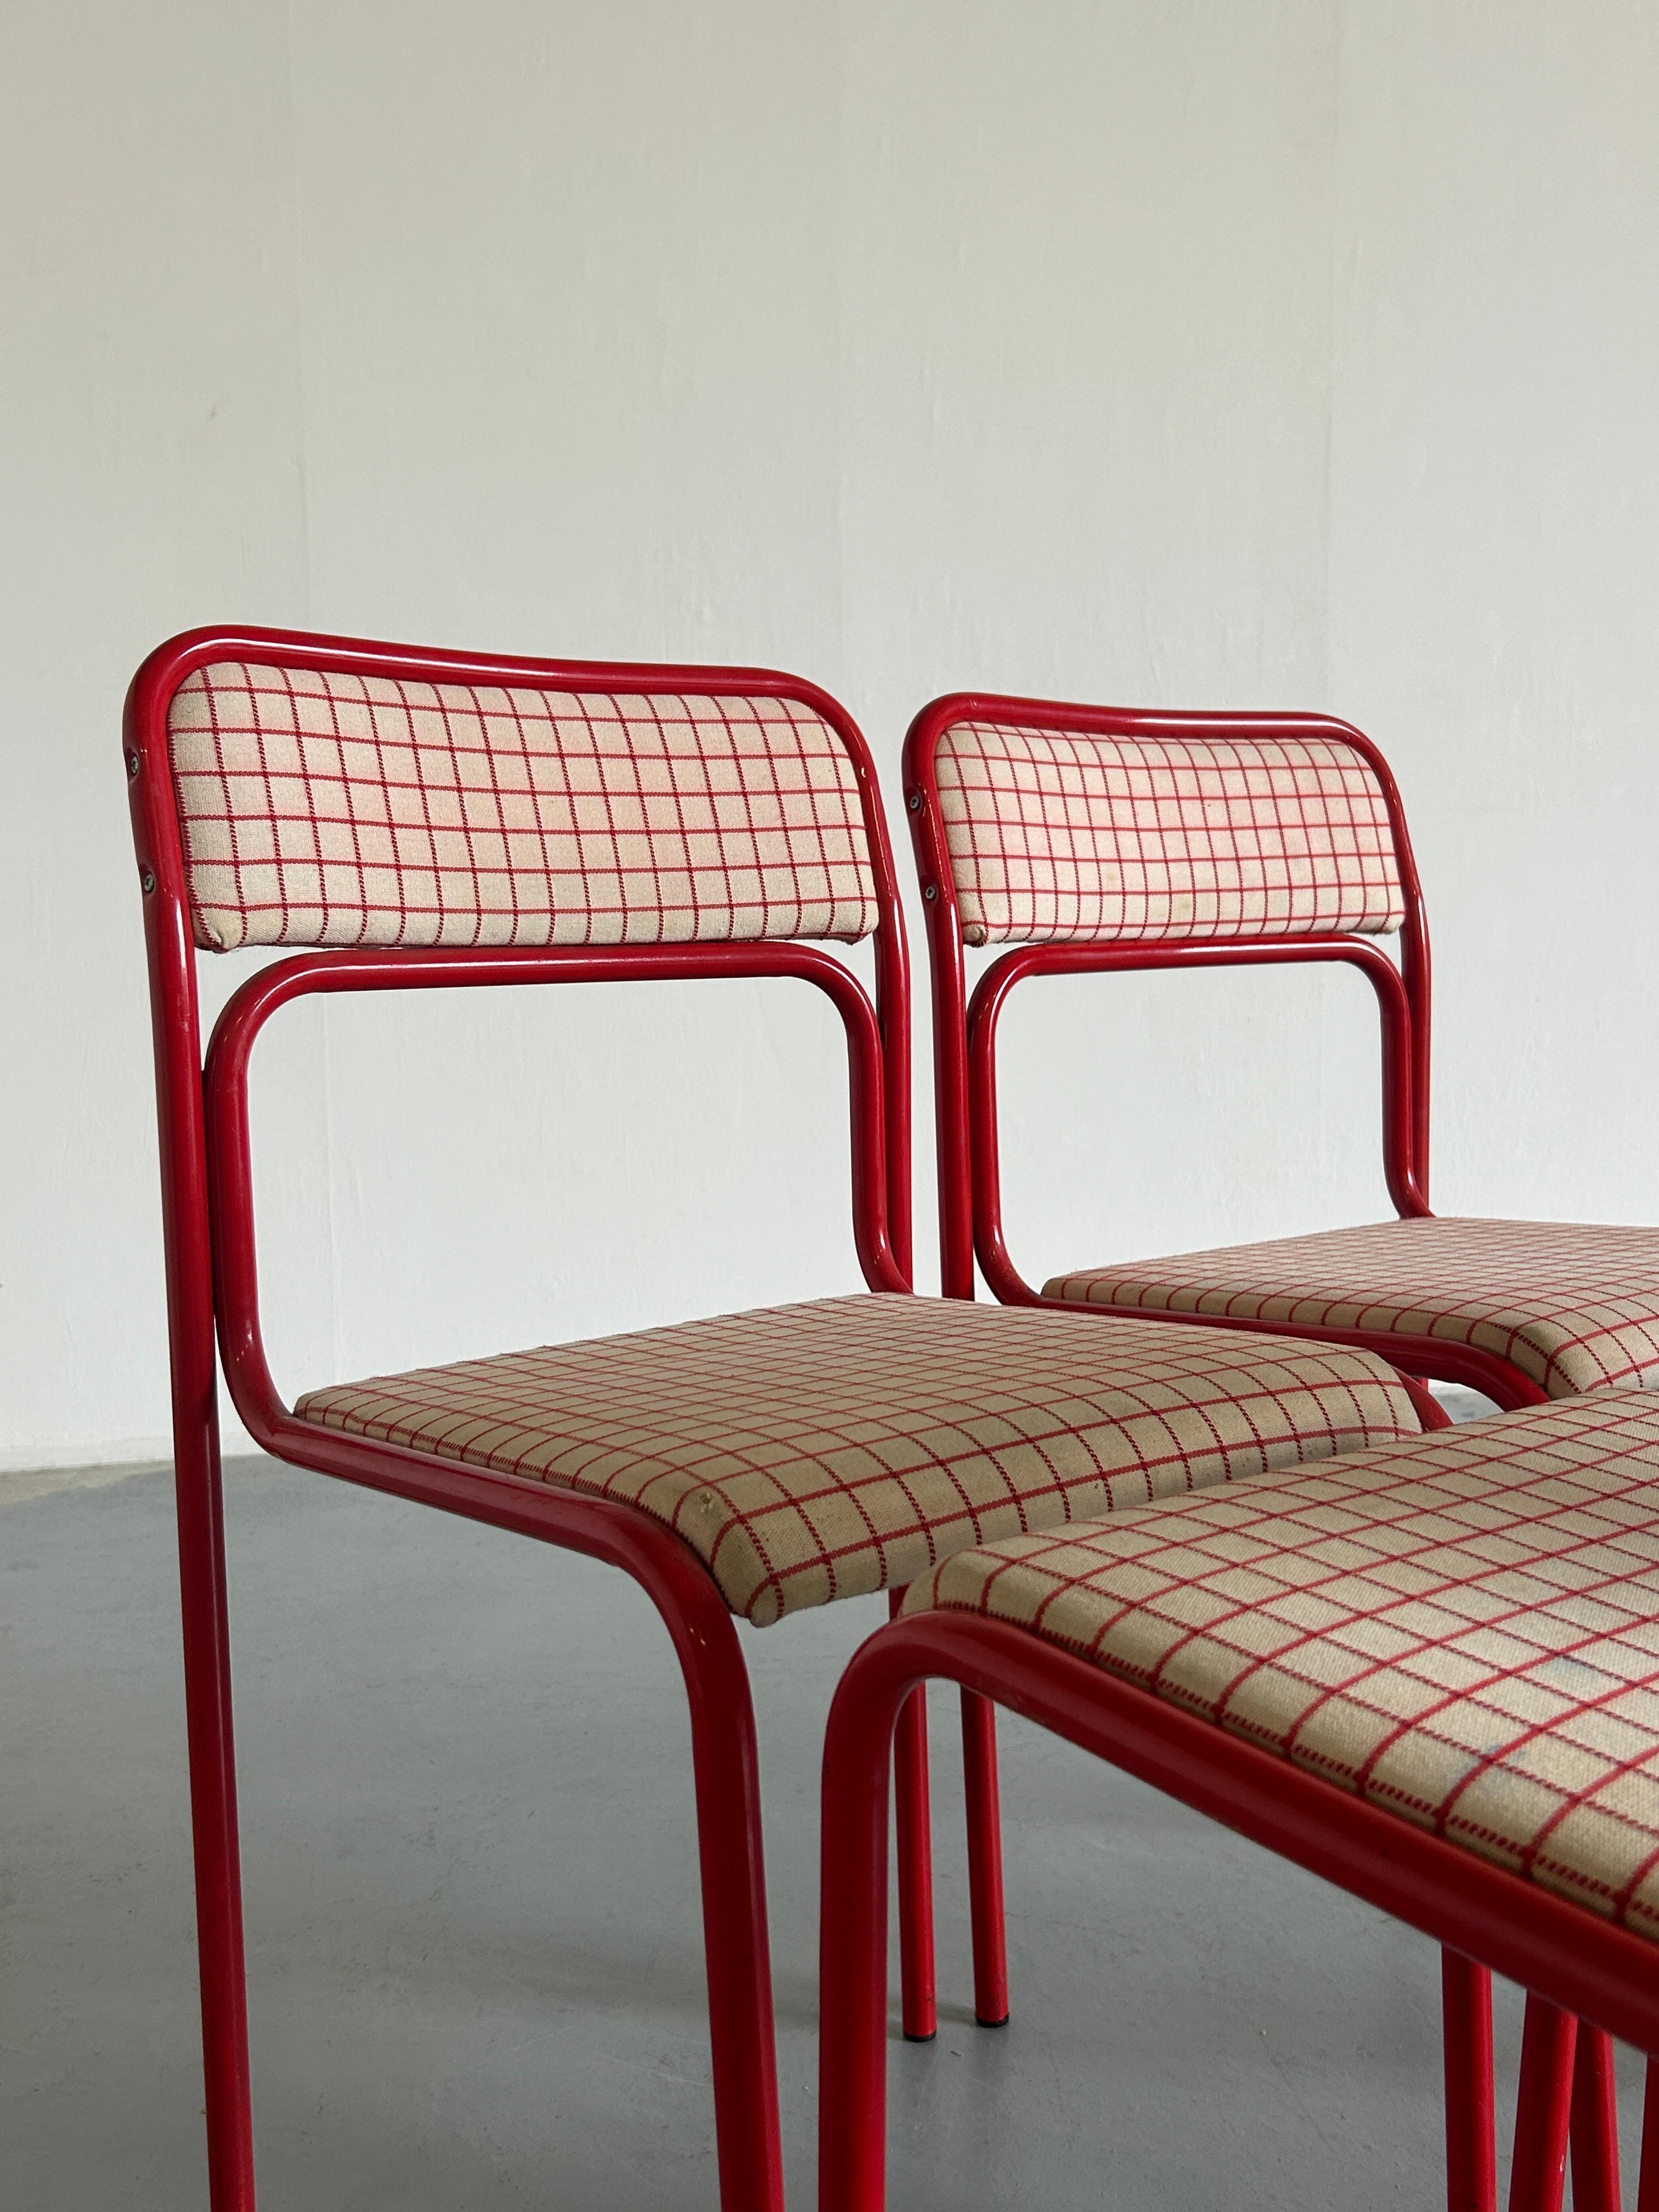 Set of 4 Pop-Art Syle Tubular Steel Checkered Red Upholstery Chairs, 80s Italy 3